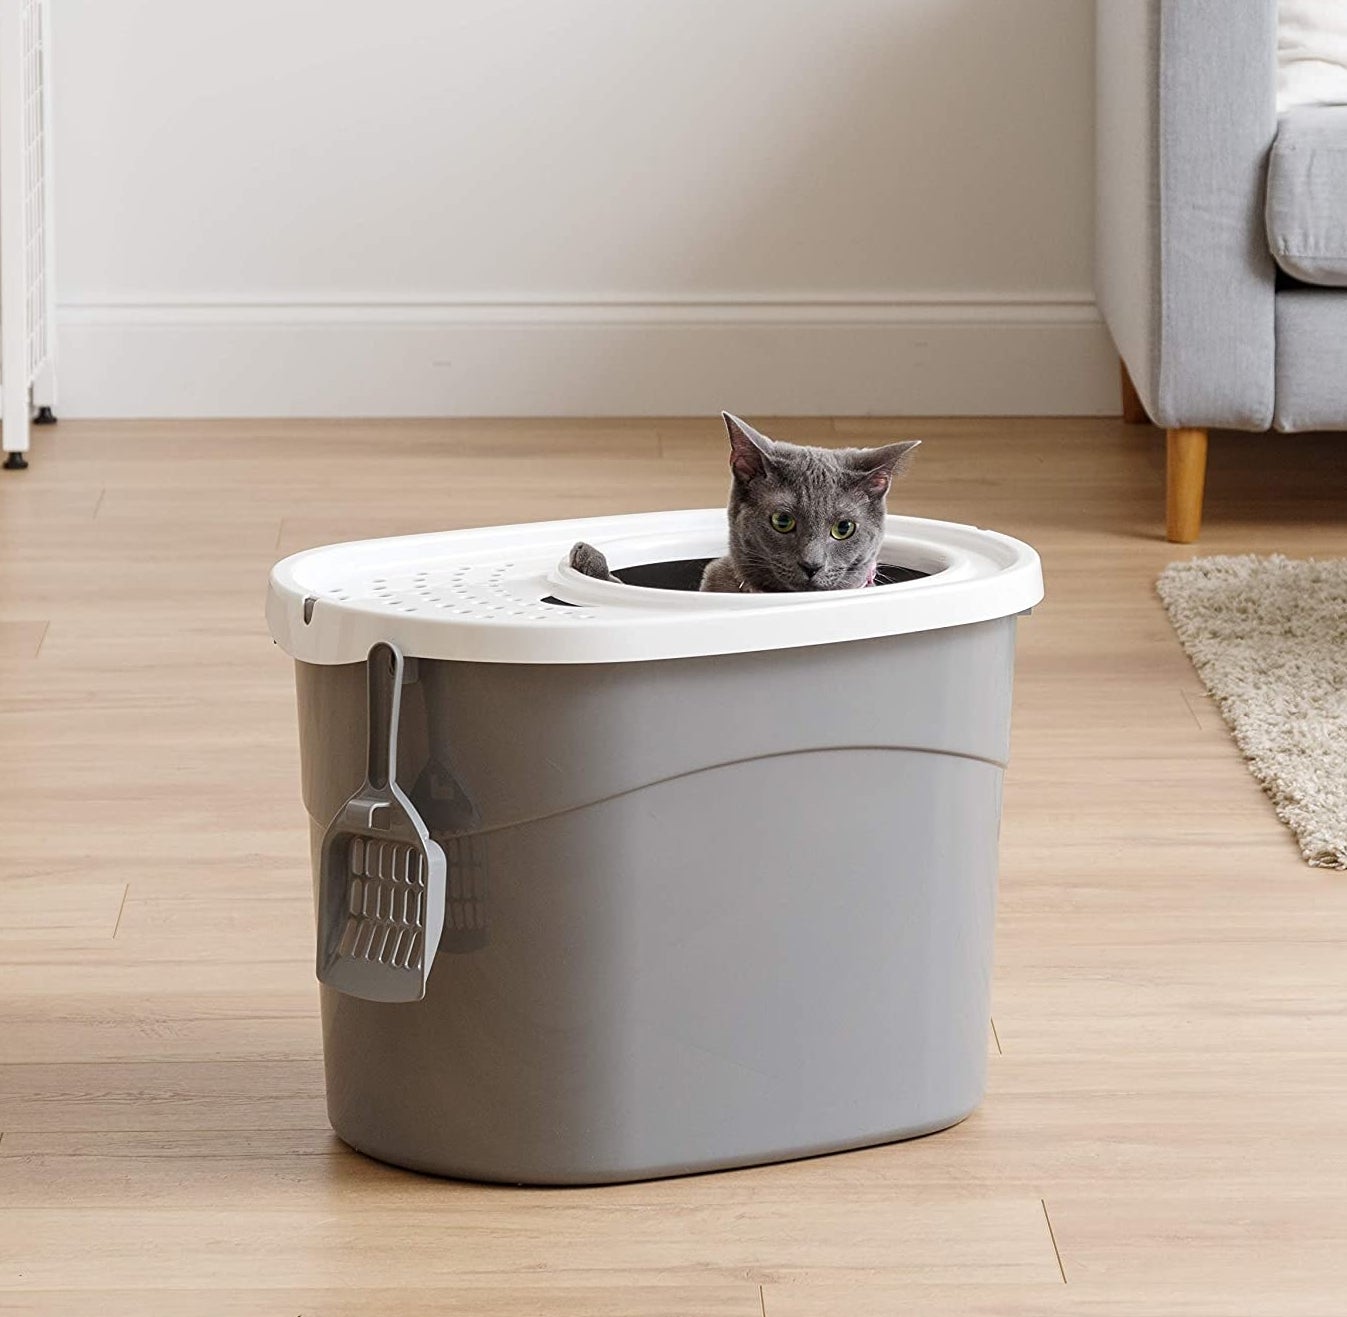 A cat inside of the litter box that has a hole in the top for entering, a ventilated lid, and a straining scoop hanging off the side 